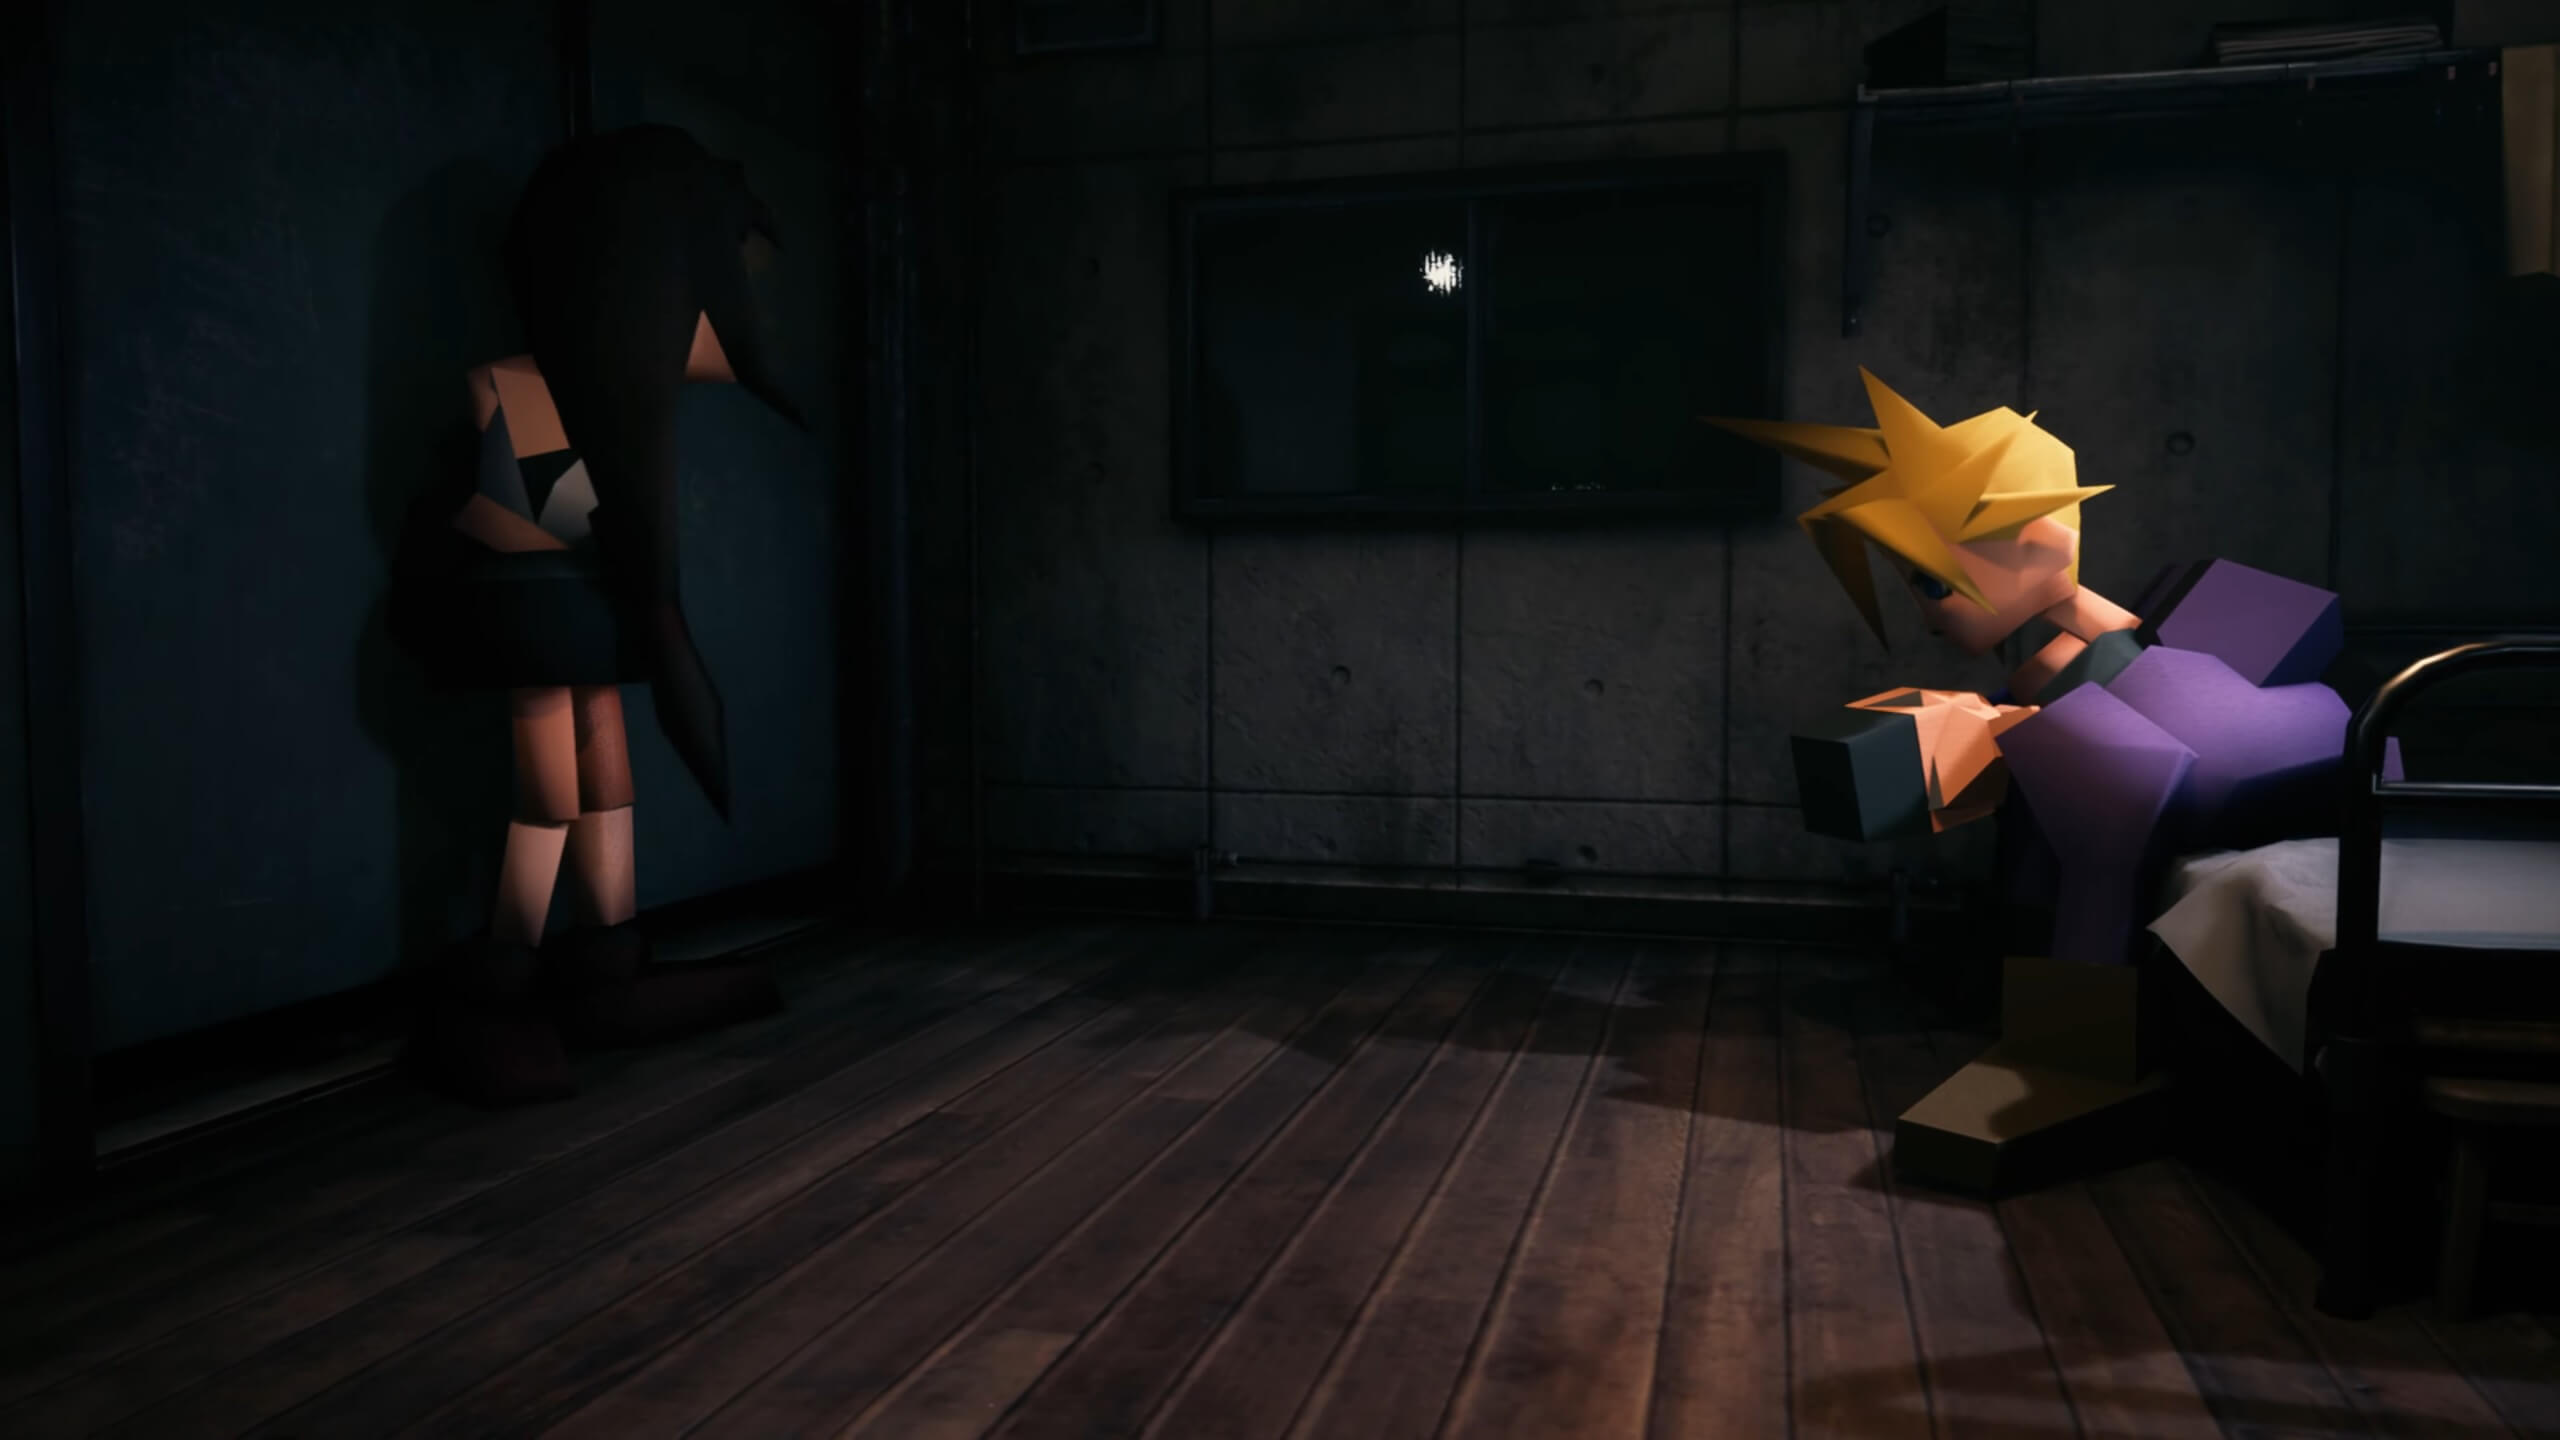 The Final Fantasy 7 Remako mod is the best way to play the